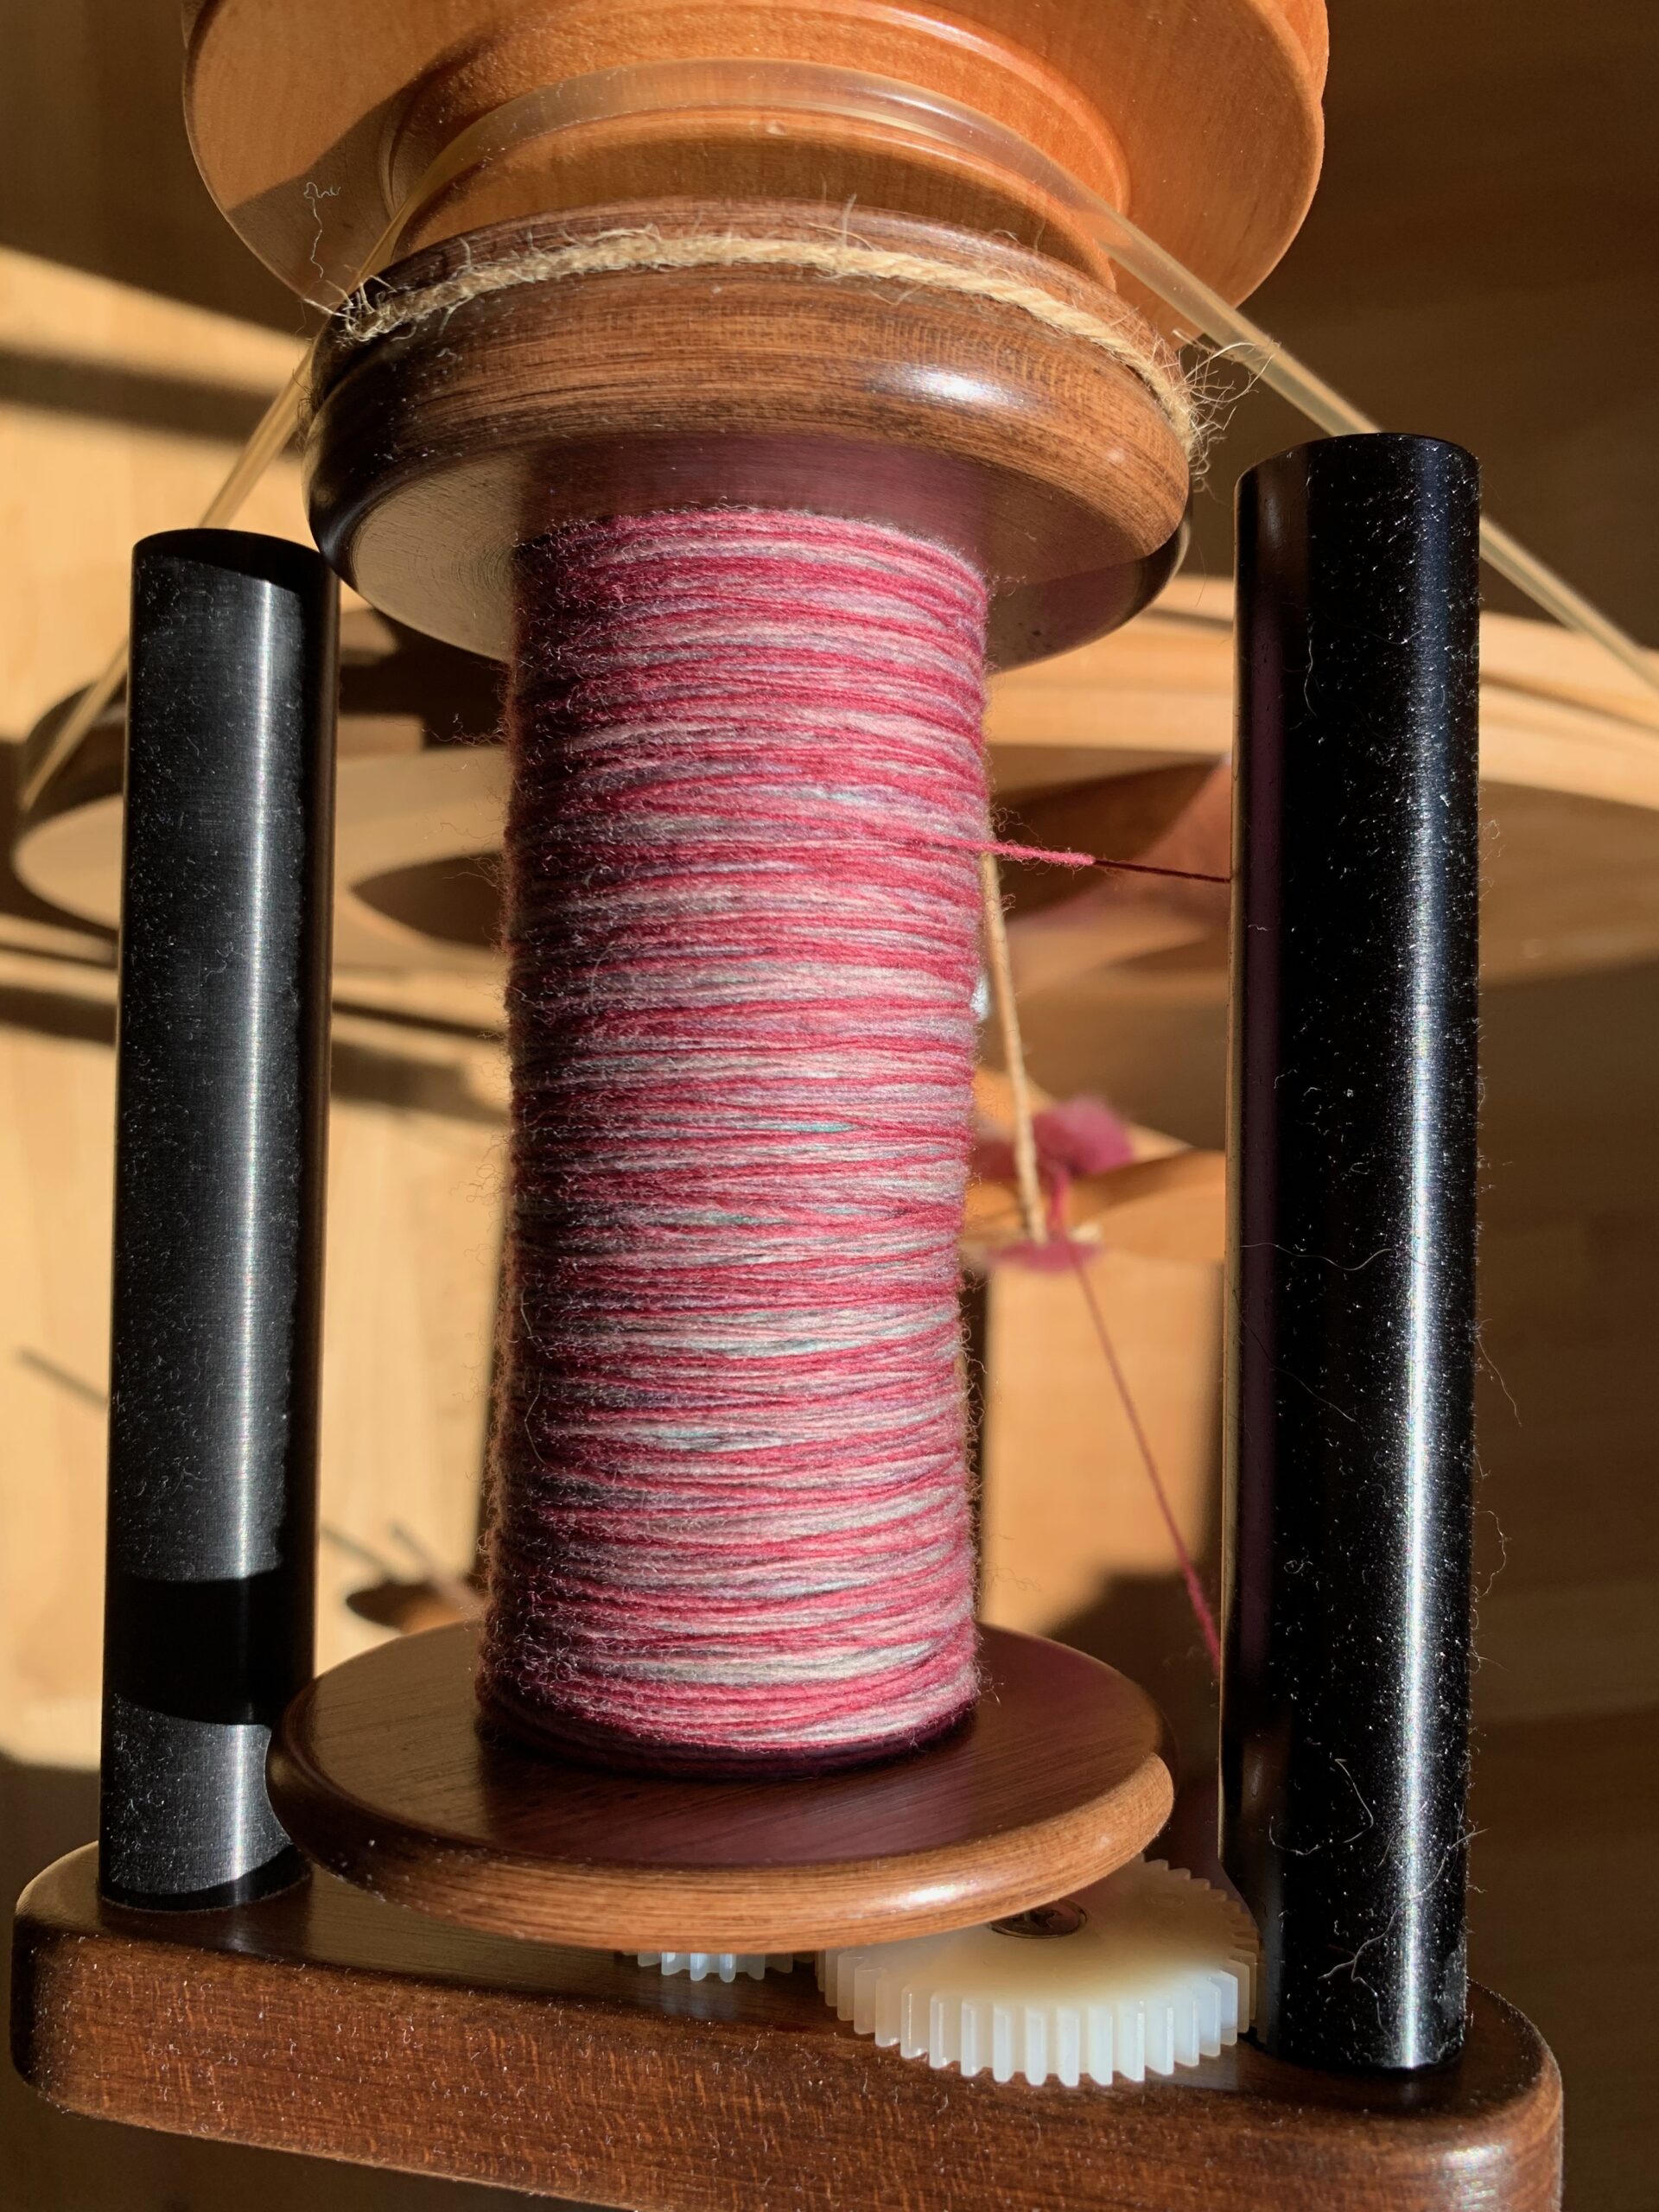 Top-down view of a bobbin on a spinning wheel with a Woolee Winder flyer. The bobbin has a singles (unplied yarn) in shades of magenta and pale green. The magenta is dominant.